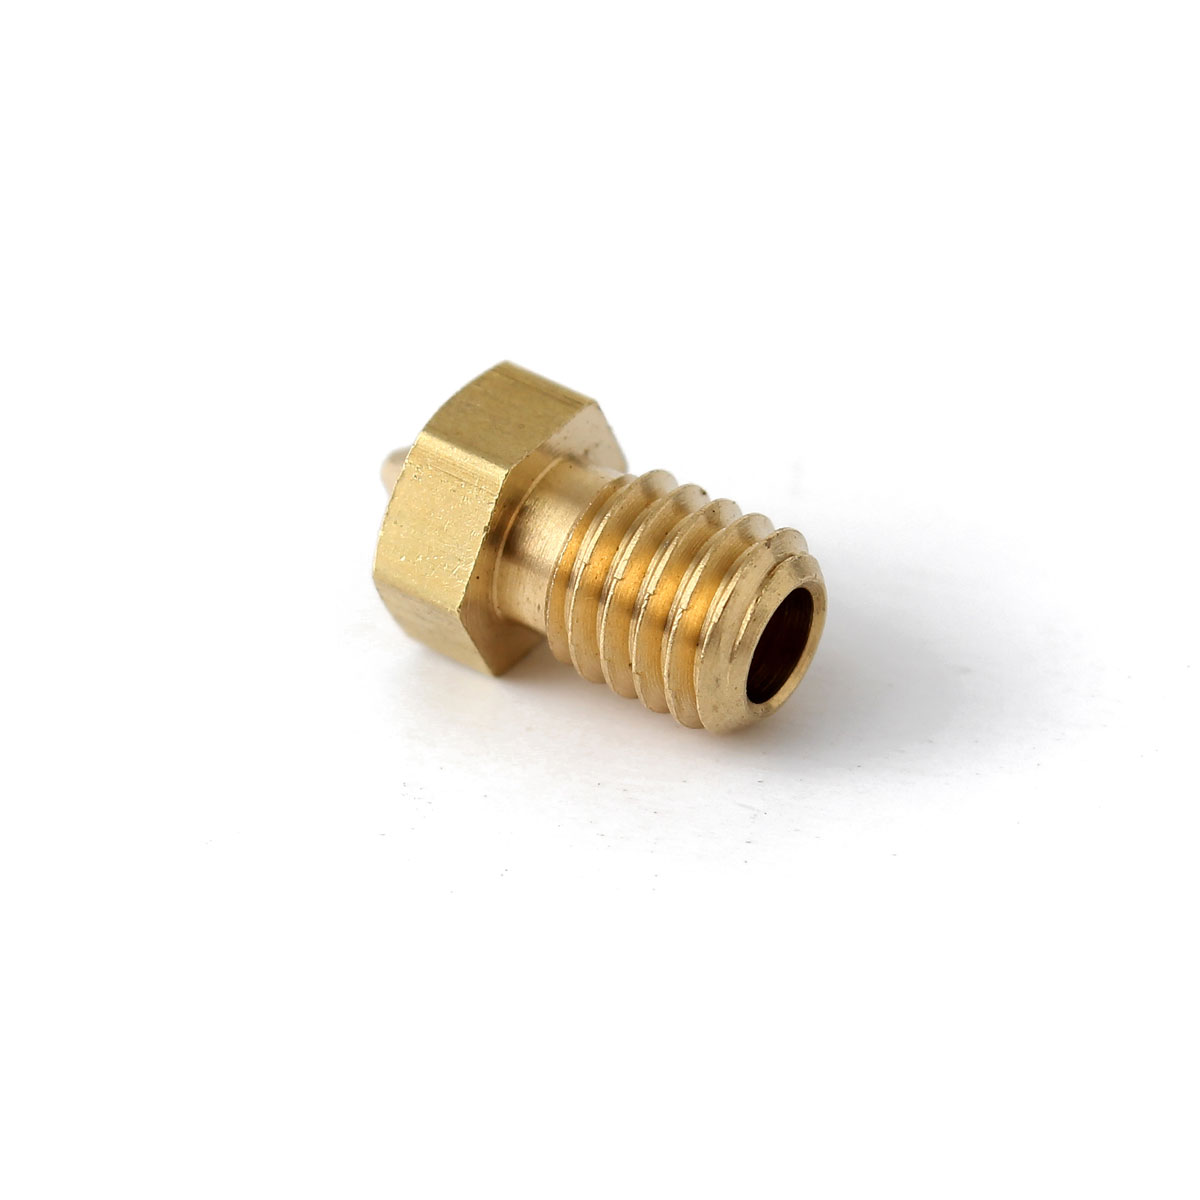 Spare-Nozzle-For-Geeetech-All-Metal-J-head-Hotend-Extruder-1146128-4